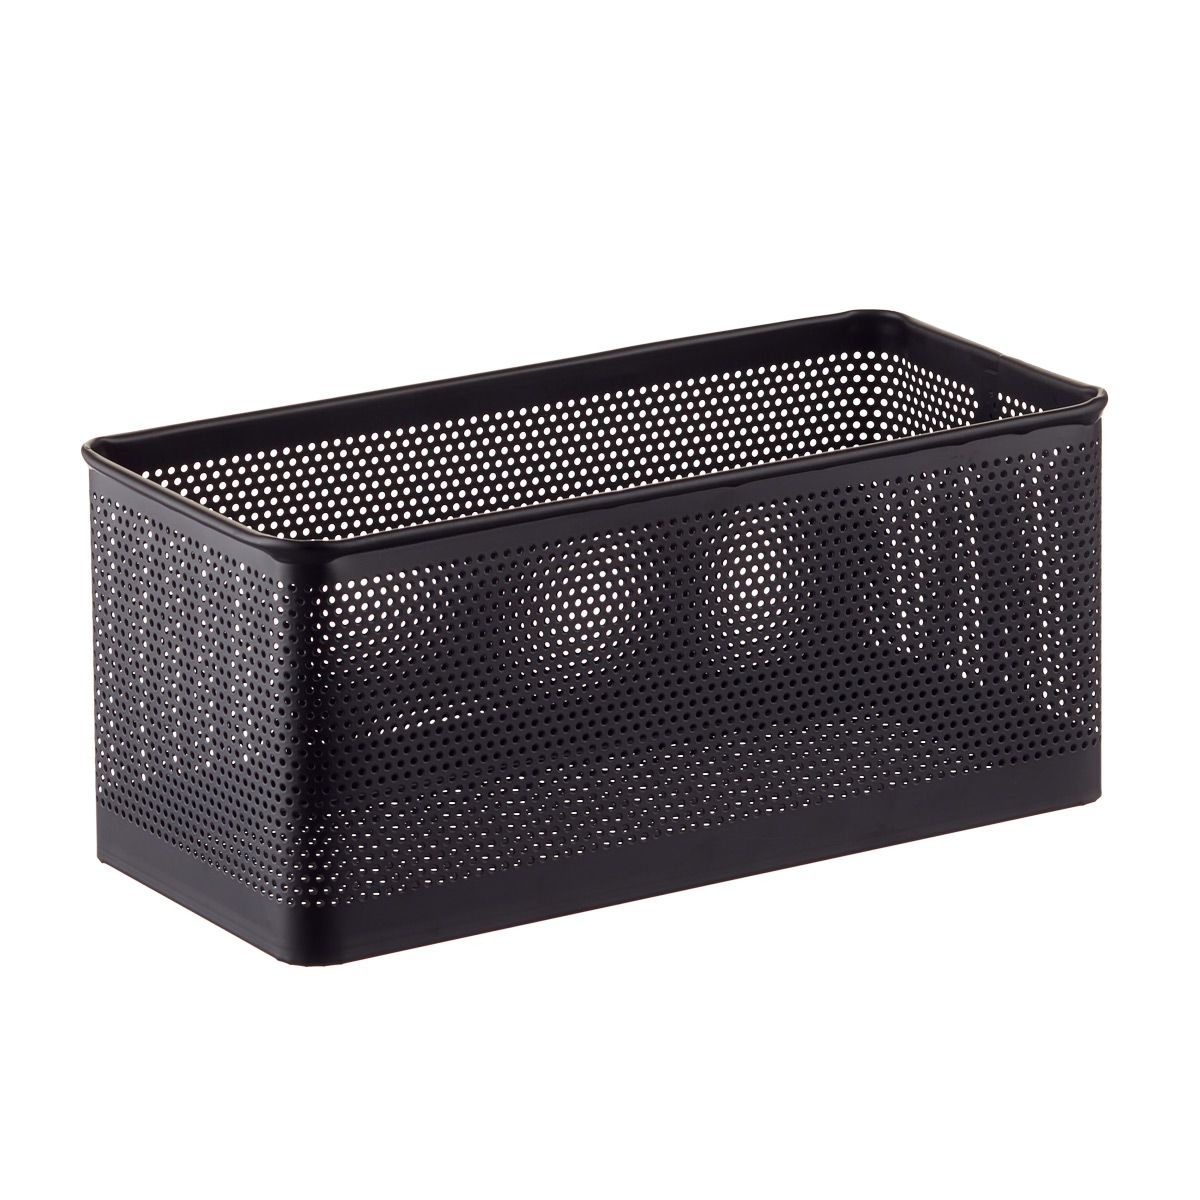 The Container Store Narrow Serena Stamped Metal Bin Black | The Container Store